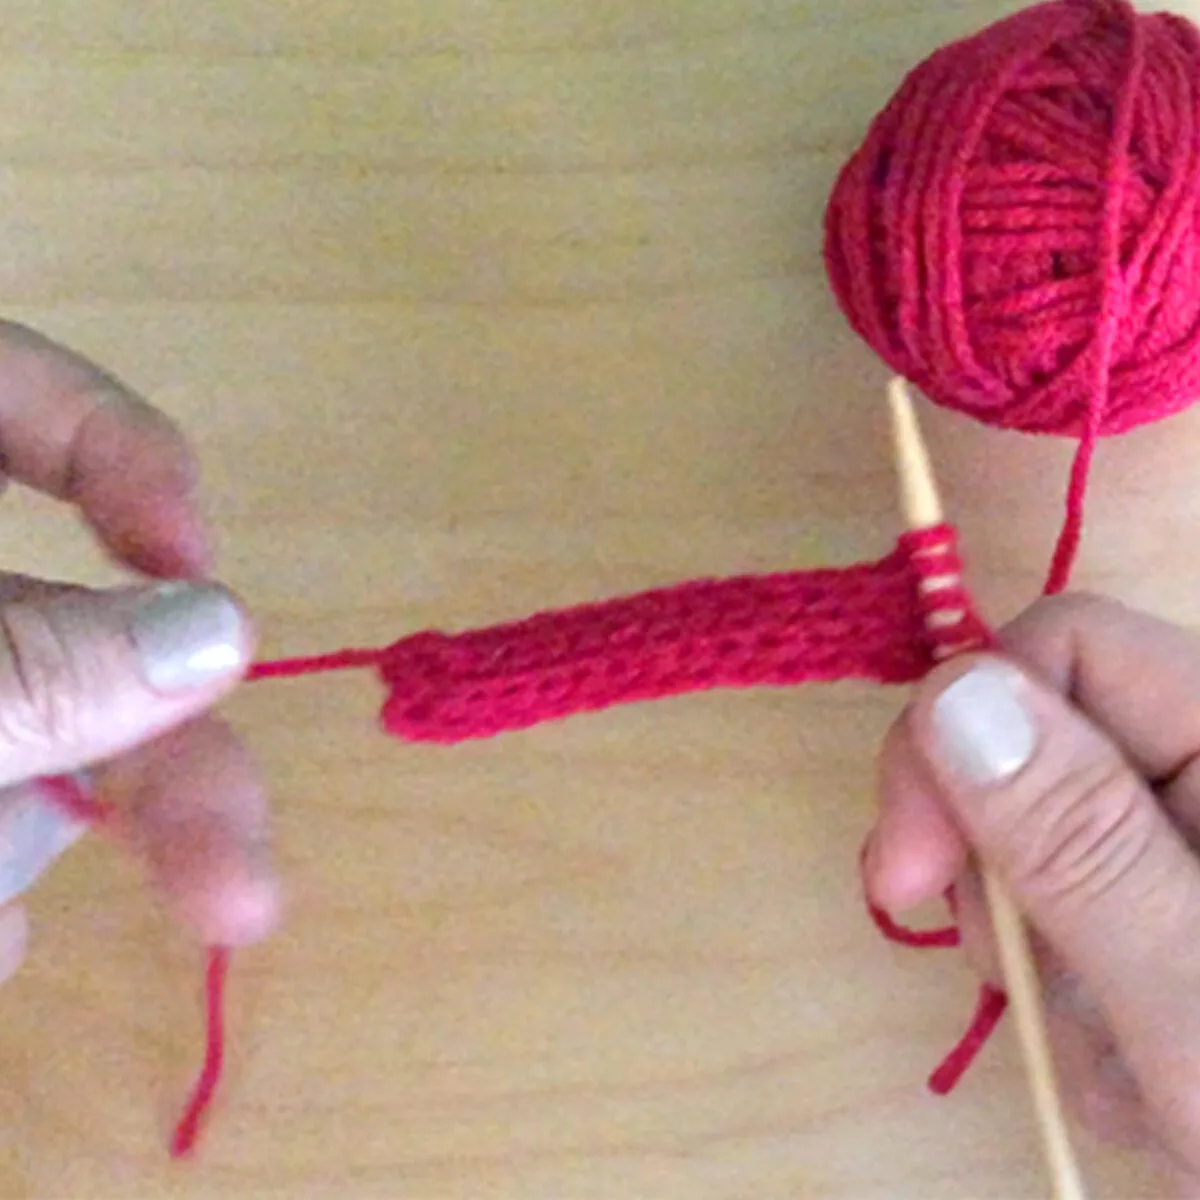 Hands knitting an i-cord with pink yarn and one knitting needle.